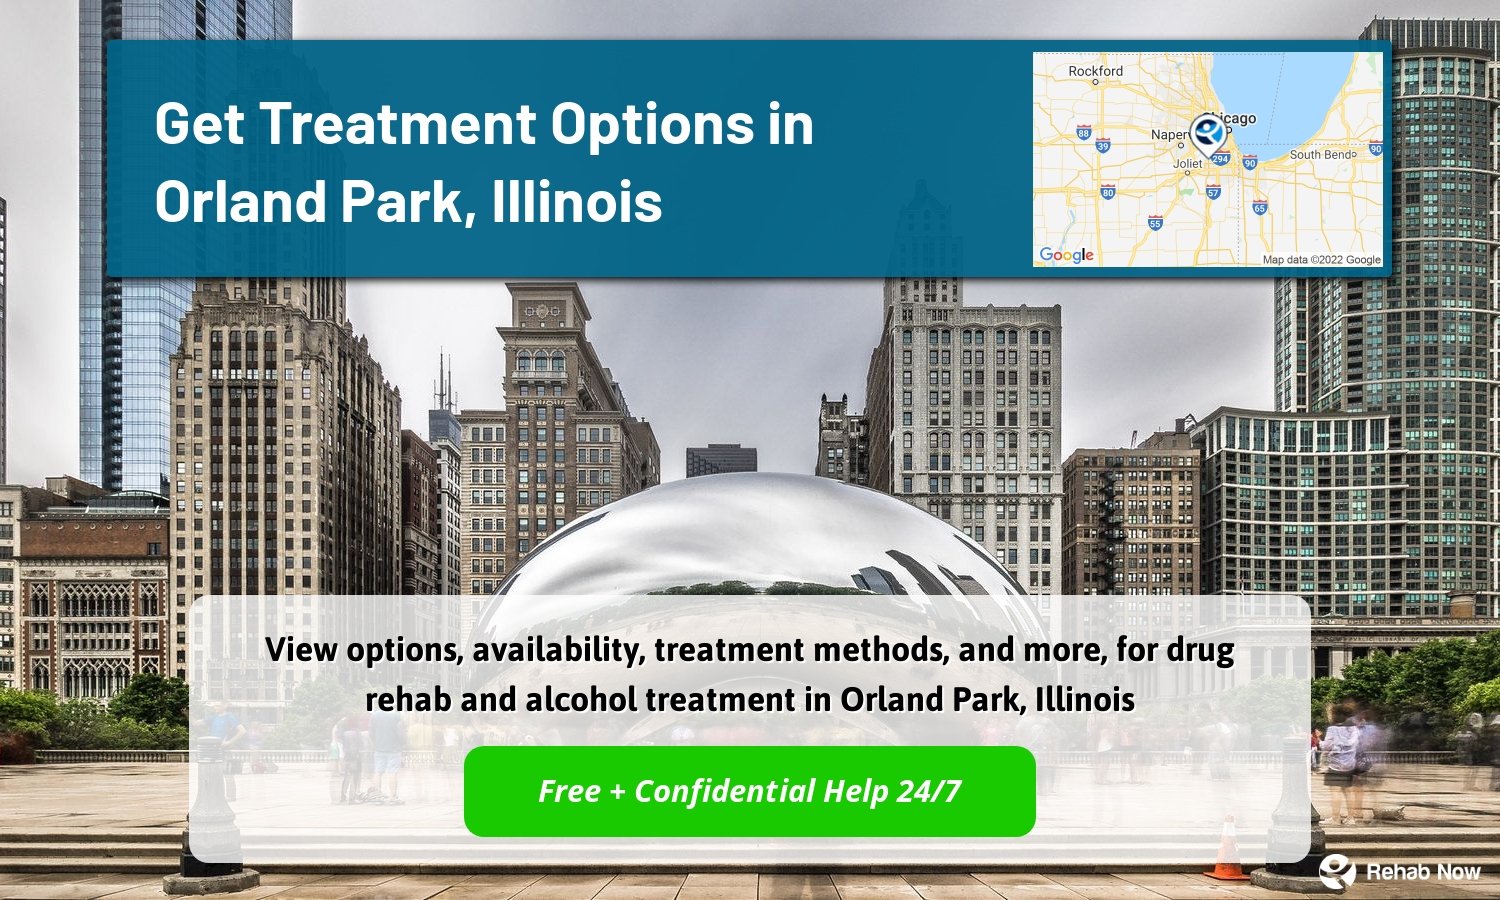 View options, availability, treatment methods, and more, for drug rehab and alcohol treatment in Orland Park, Illinois